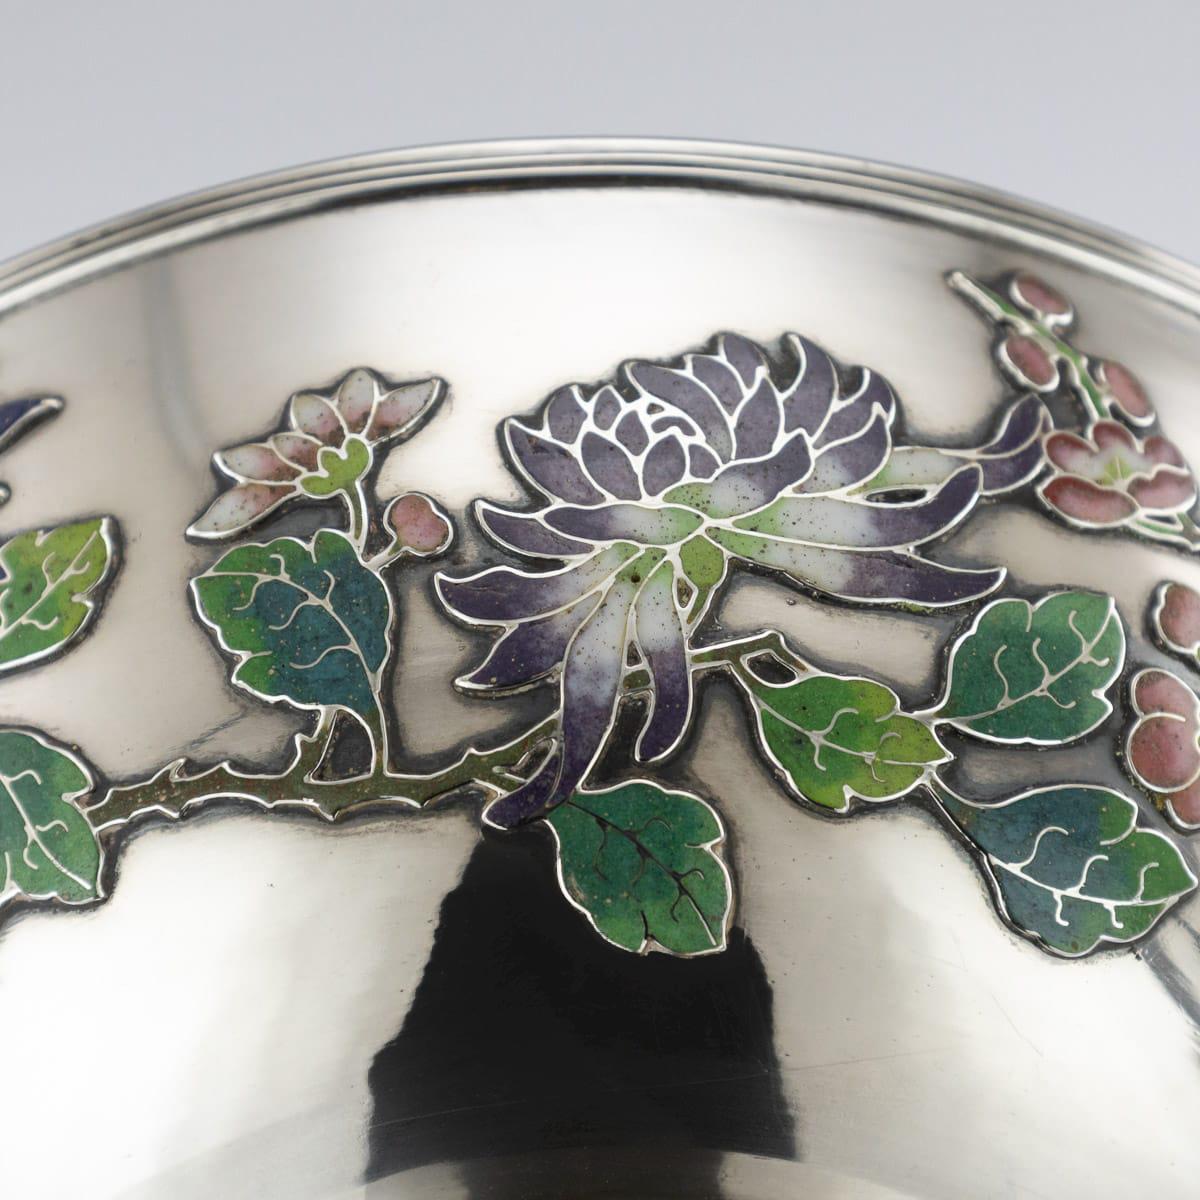 19th Century Rare Chinese Export Solid Silver & Enamel Bowl, Wo Kwong circa 1890 For Sale 8